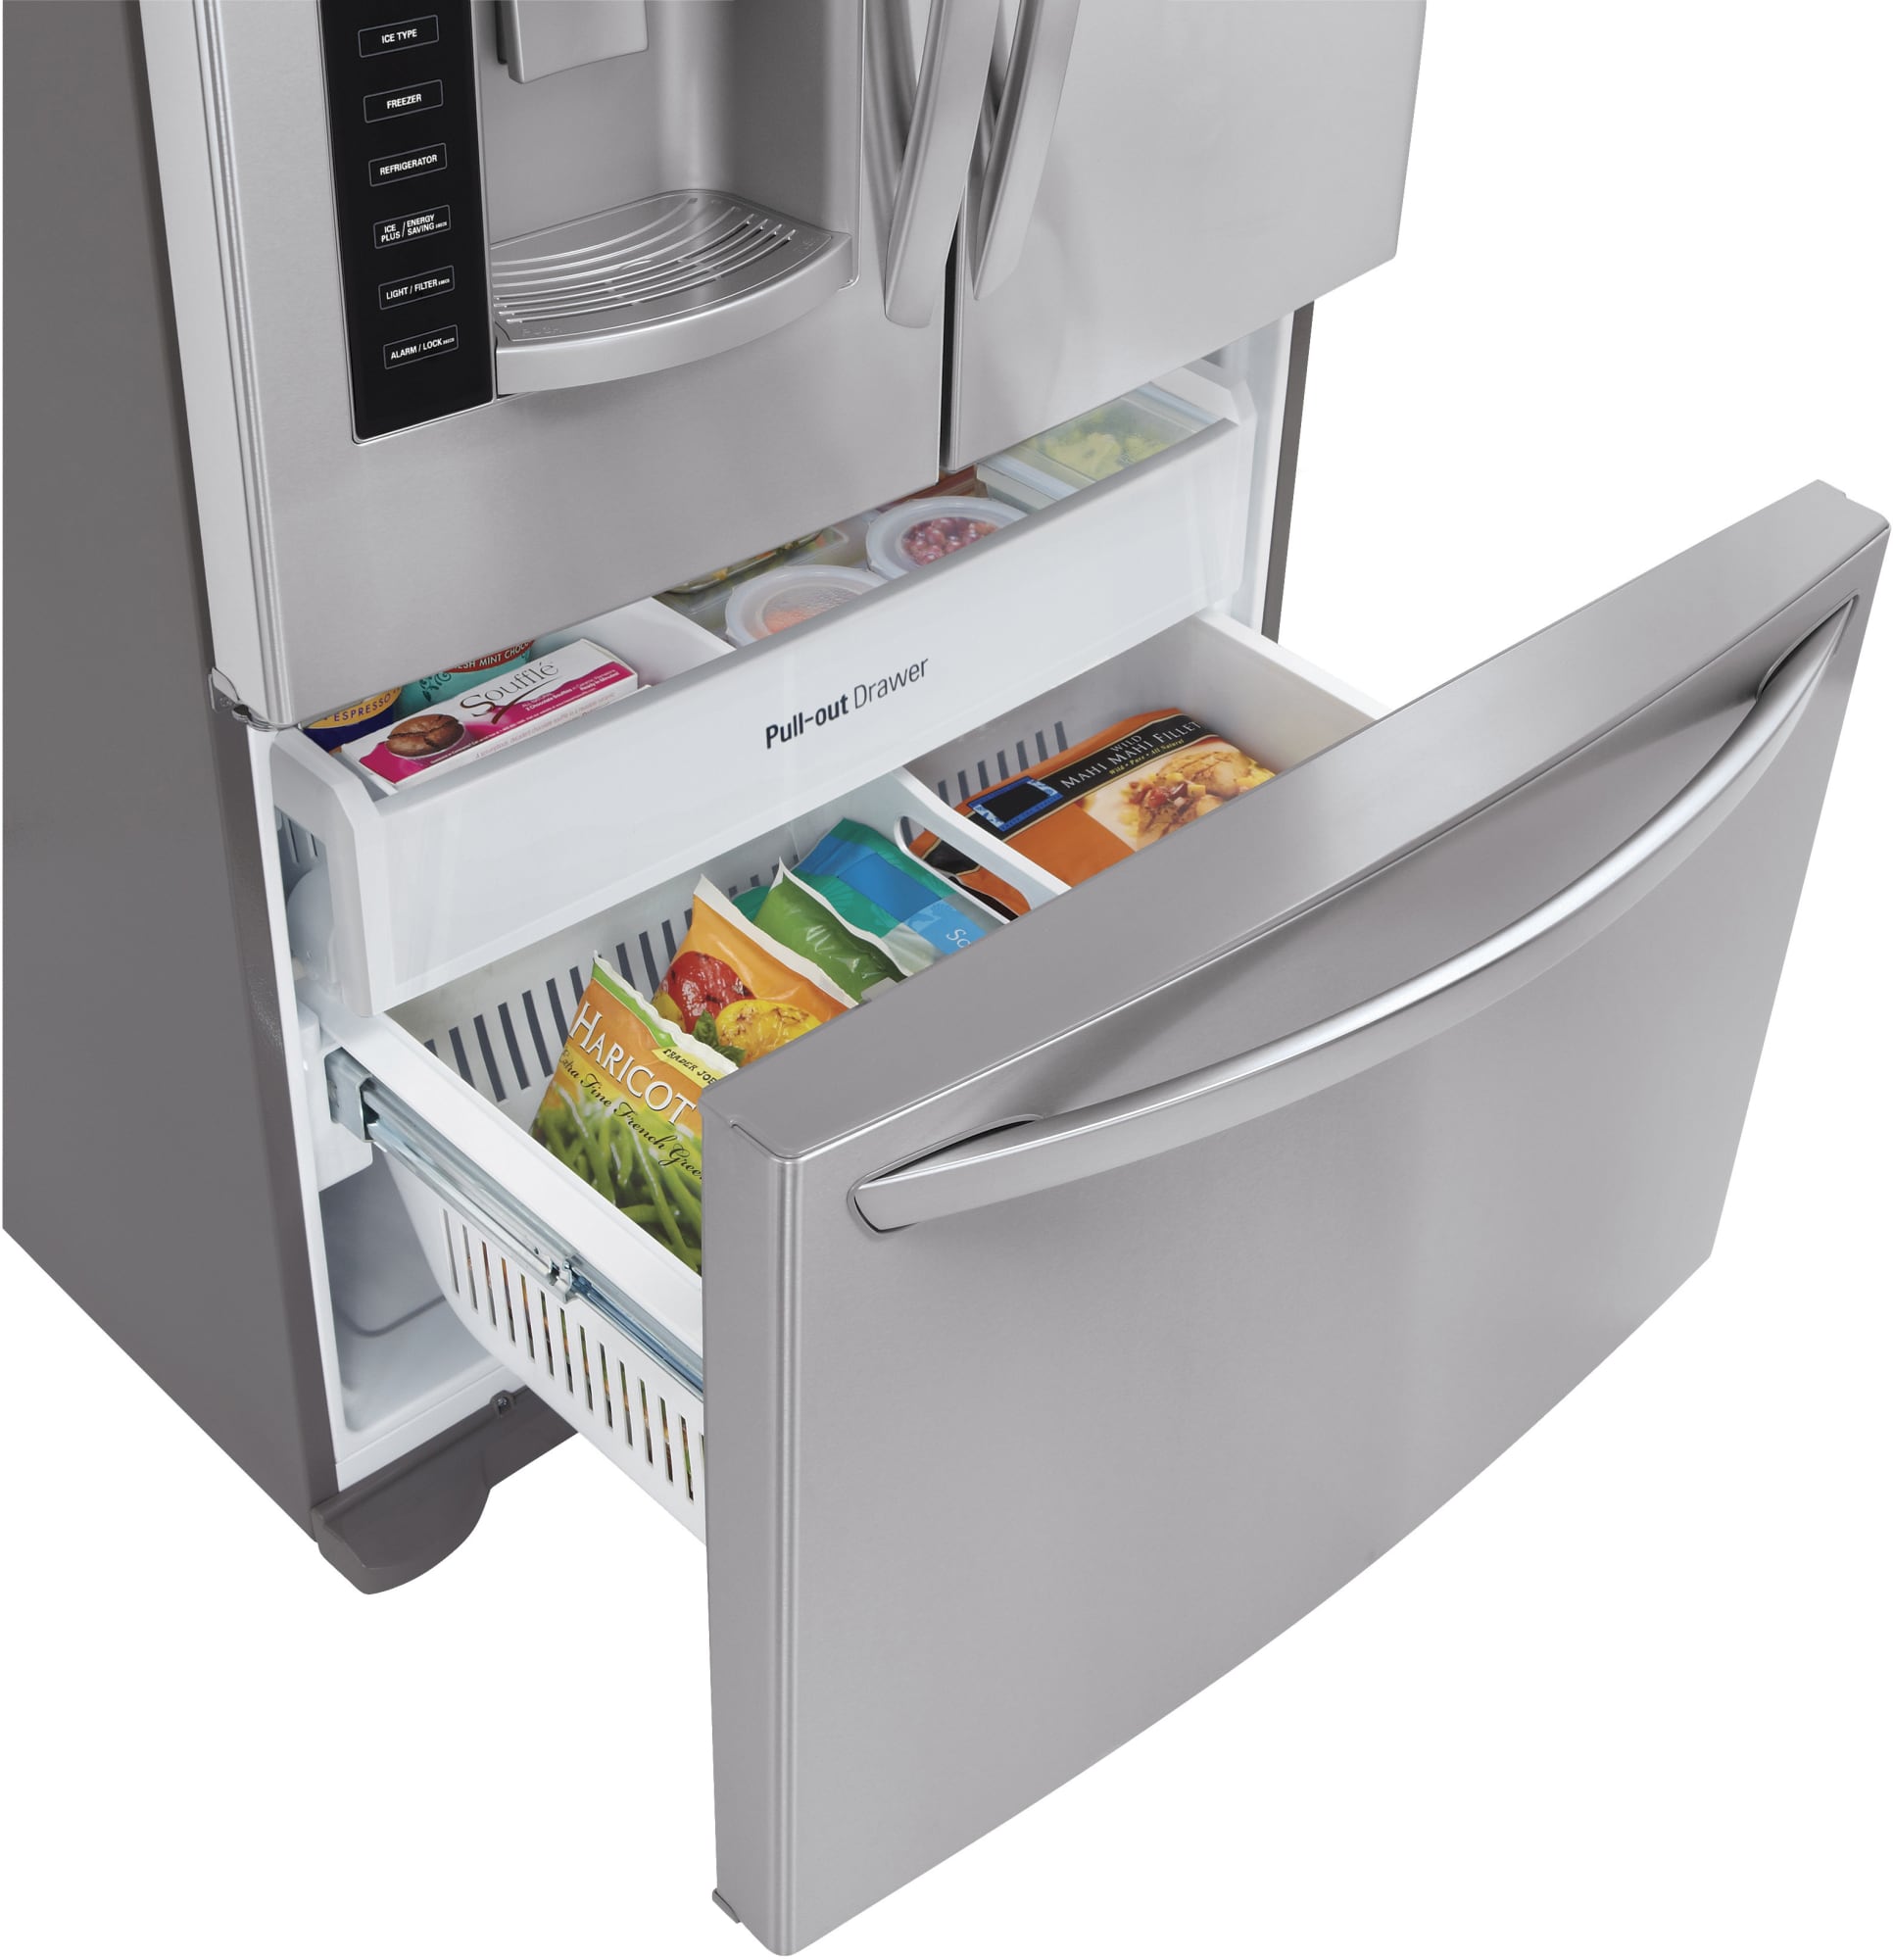 LG LFX25974ST 36 Inch French Door Refrigerator with Slim SpacePlus™ Ice System, Smart Cooling